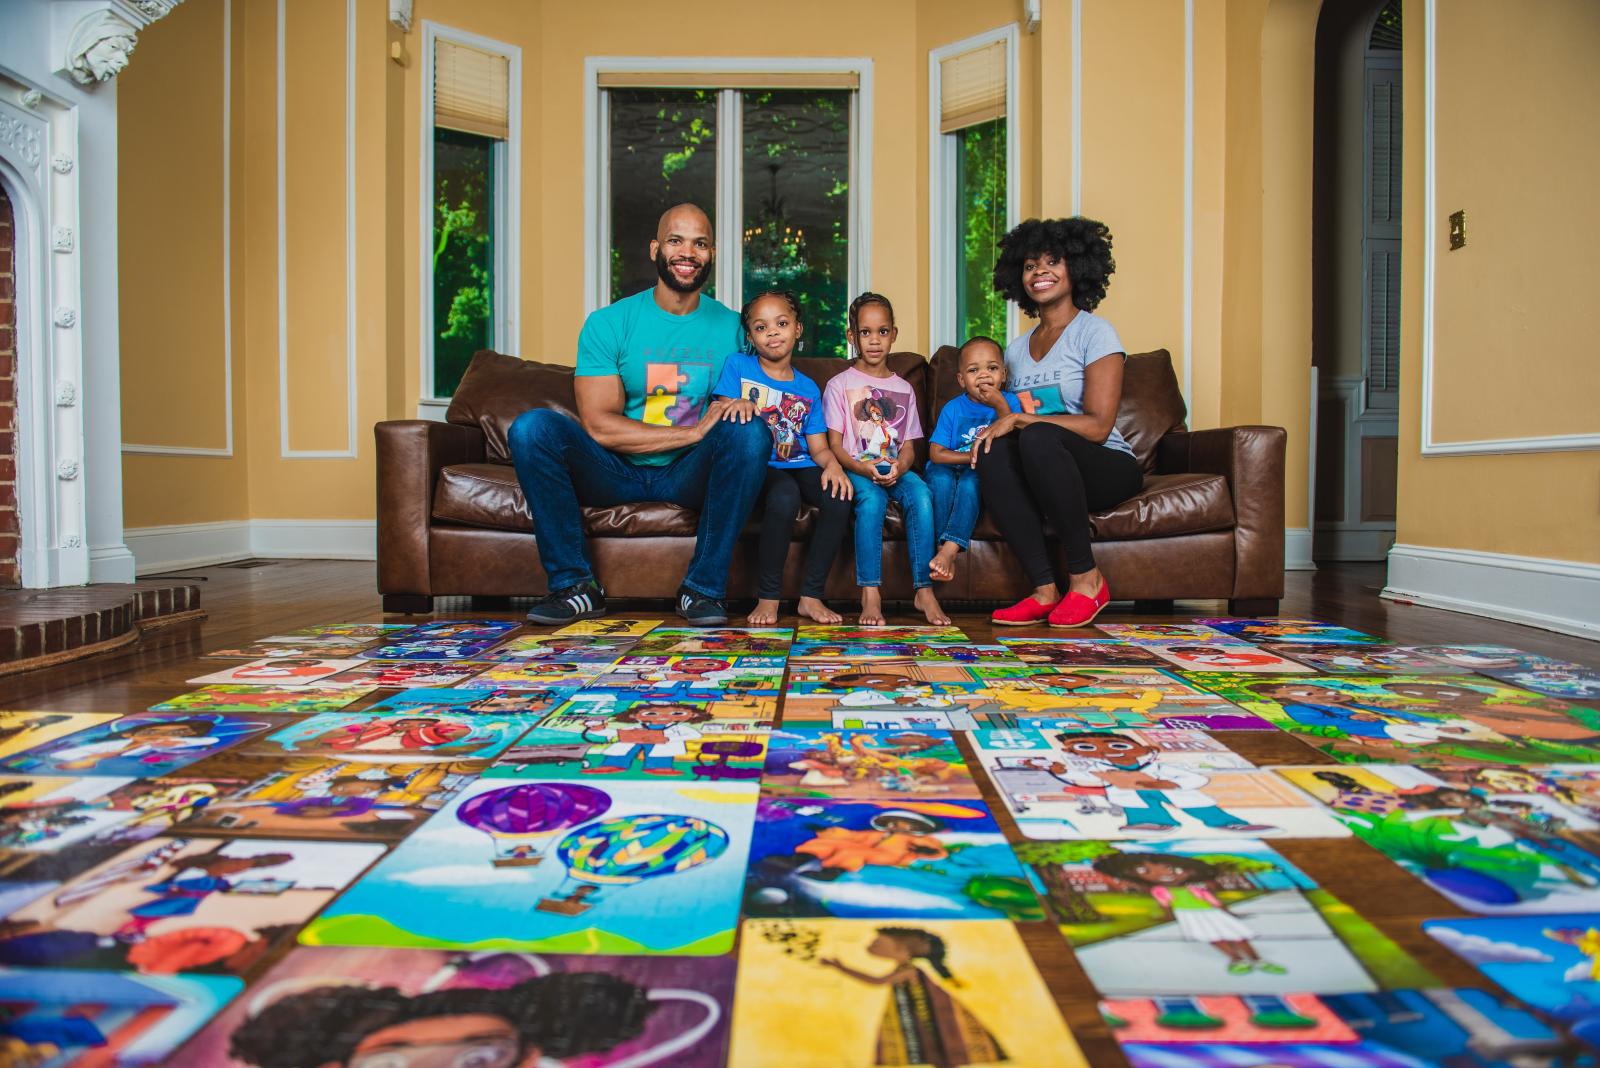 Matthew Goins and family with puzzles